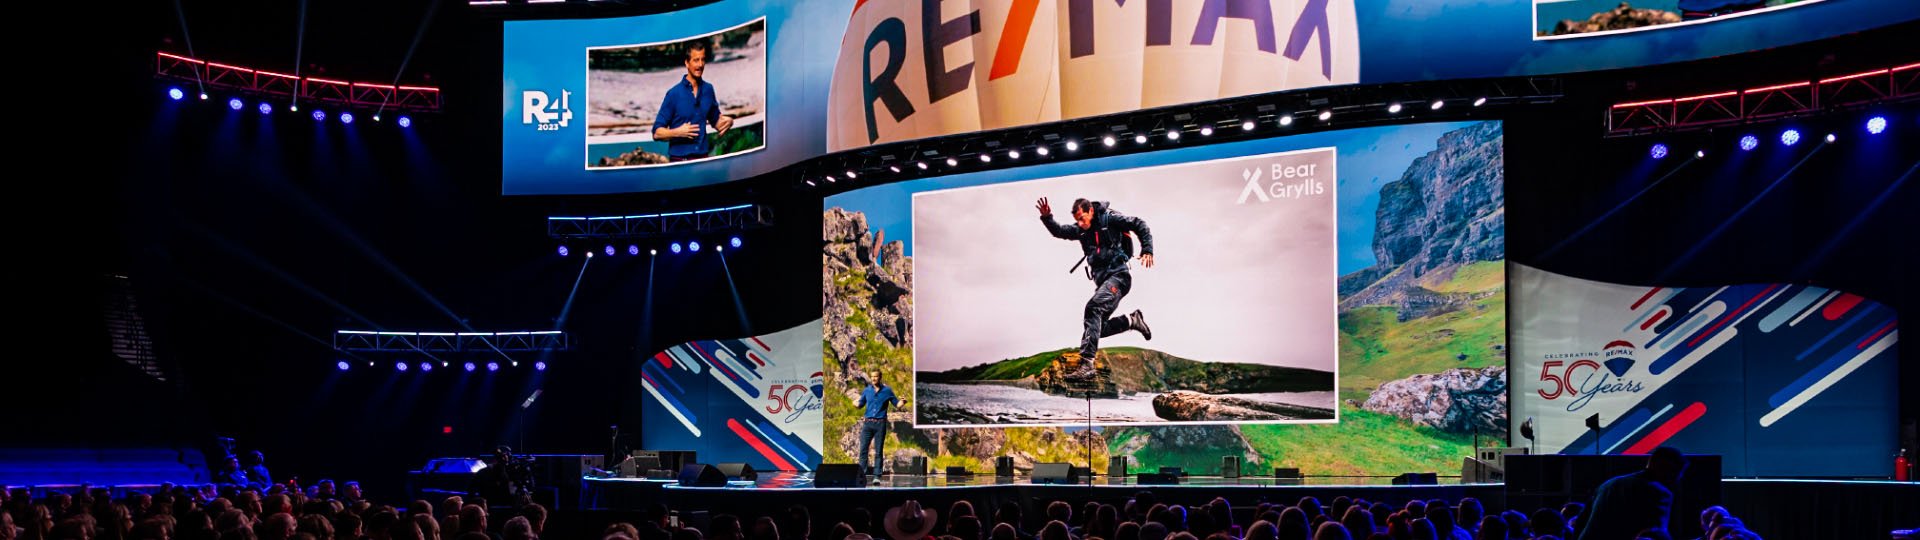 REMAX R4 Conference in Las Vegas, Nevada in the MGM Grand Ballroom. LED Wall stage set design with speaker talking about mountain climbing.